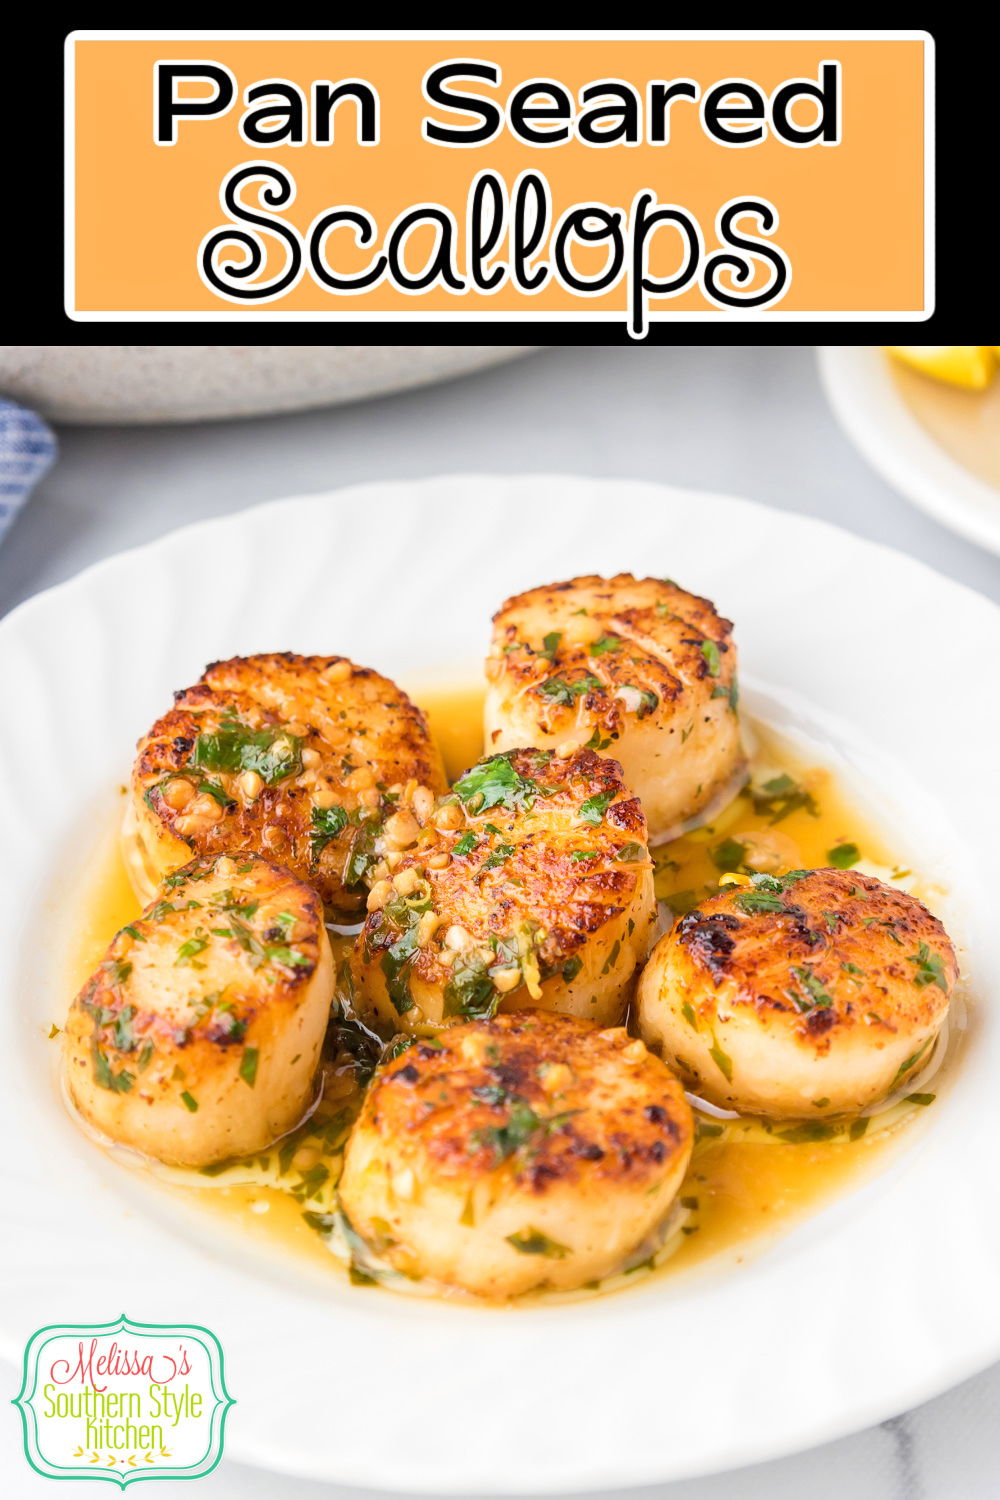 These crusted Seared Scallops are basted with a fresh lemon garlic butter pan sauce for an easy and impressive seafood dish. #scallops #searedscallops #seafoodrecipes #lemonbutter #scallopswithlemon #cookedscallops pansearedscallops